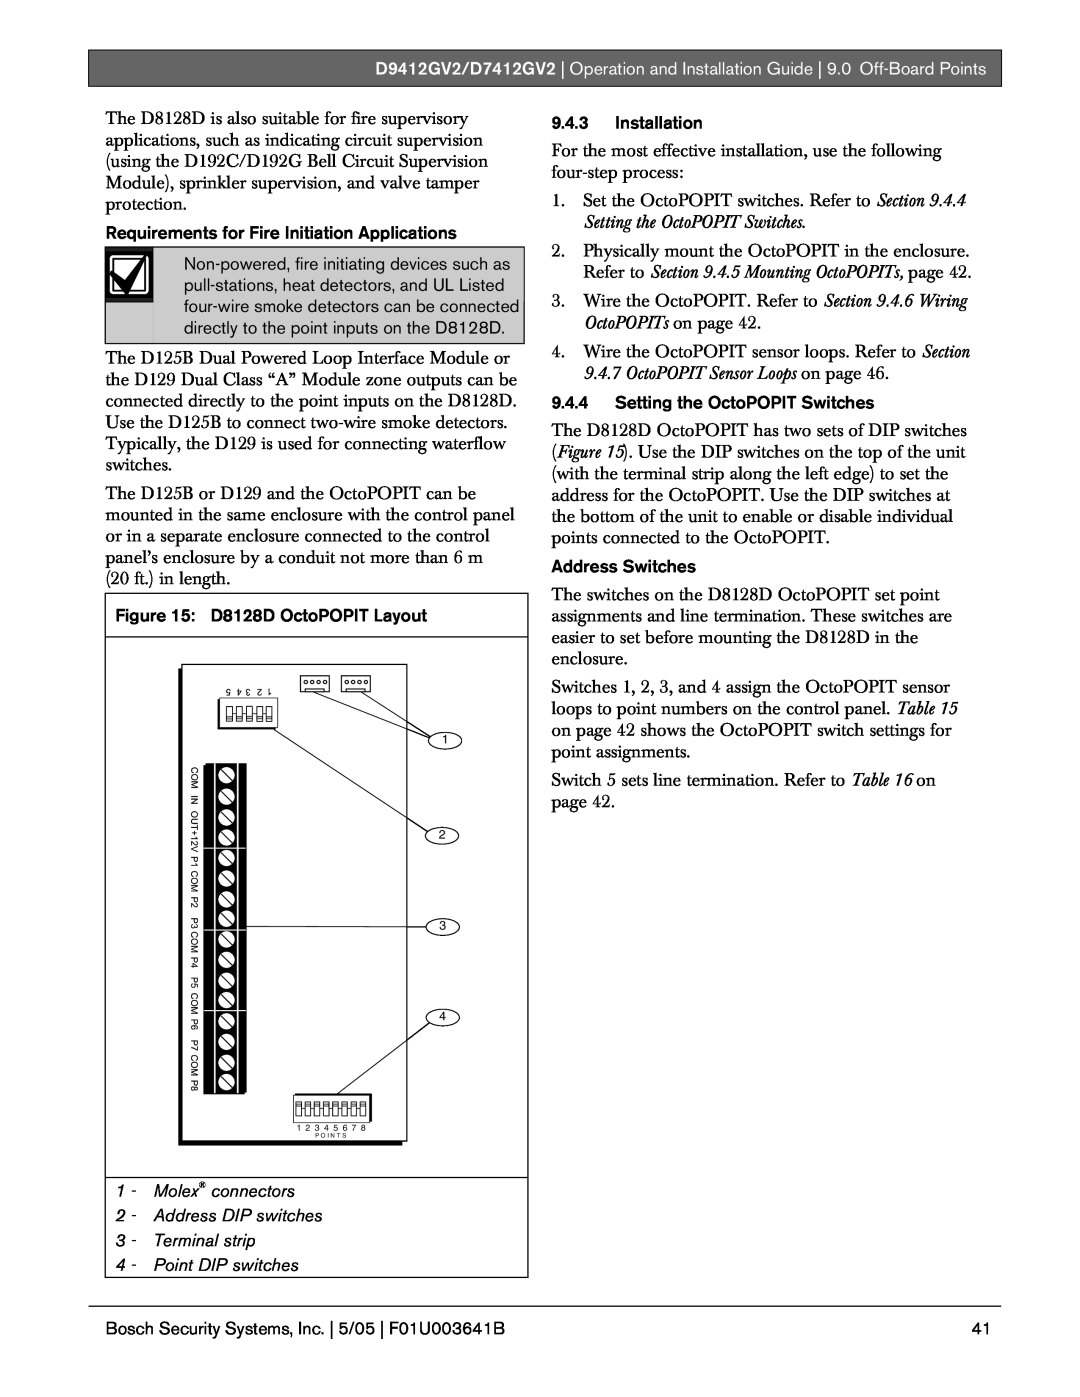 Bosch Appliances D9412GV2 manual Requirements for Fire Initiation Applications, D8128D OctoPOPIT Layout, 9.4.3Installation 